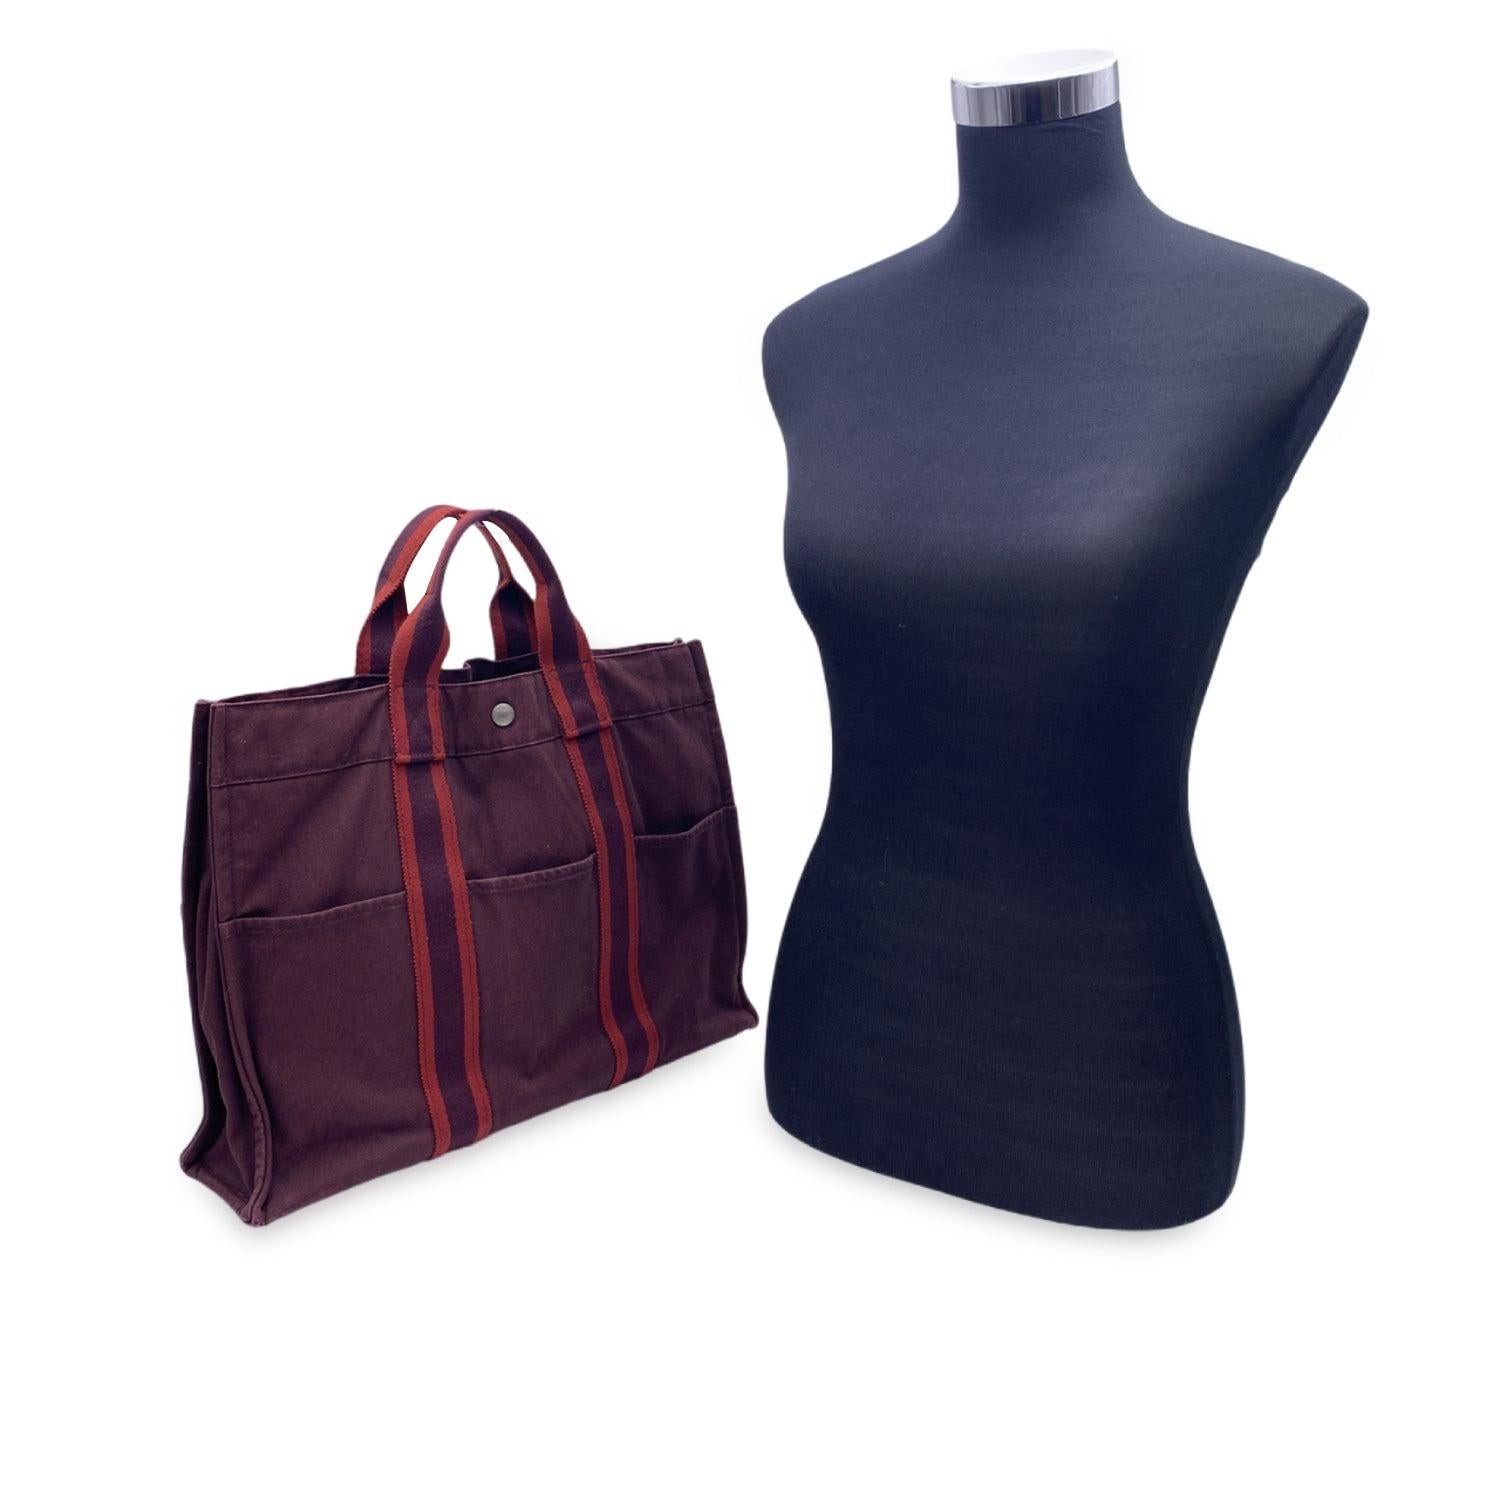 HERMES FOURRE TOUT - MM' - Tote handbag. Made in France. Brown/burgundy color with red stripes. Material: 100% cotton. It has snaps on both ends for expansion. Durable canvas handles, perfect for casual and everyday use. Open top with middle snap